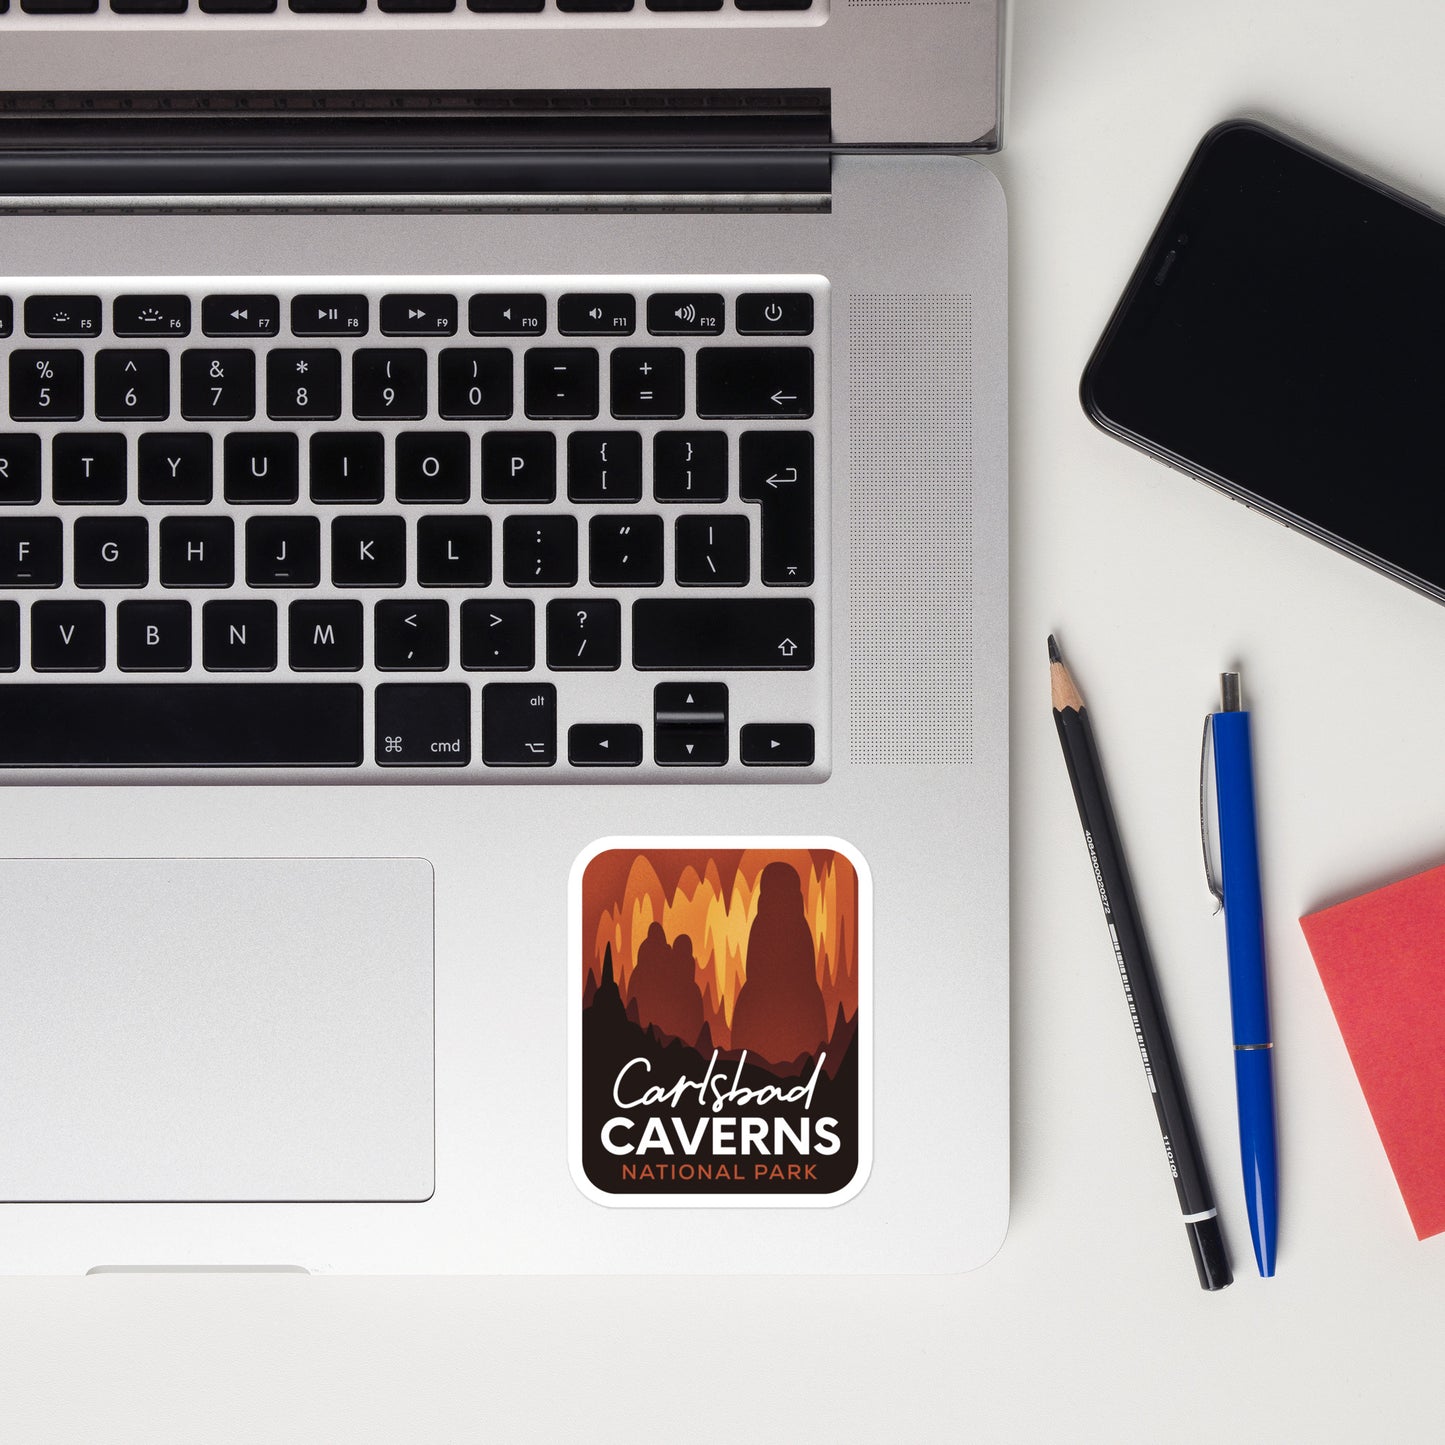 A sticker of Carlsbad Caverns National Park on a laptop